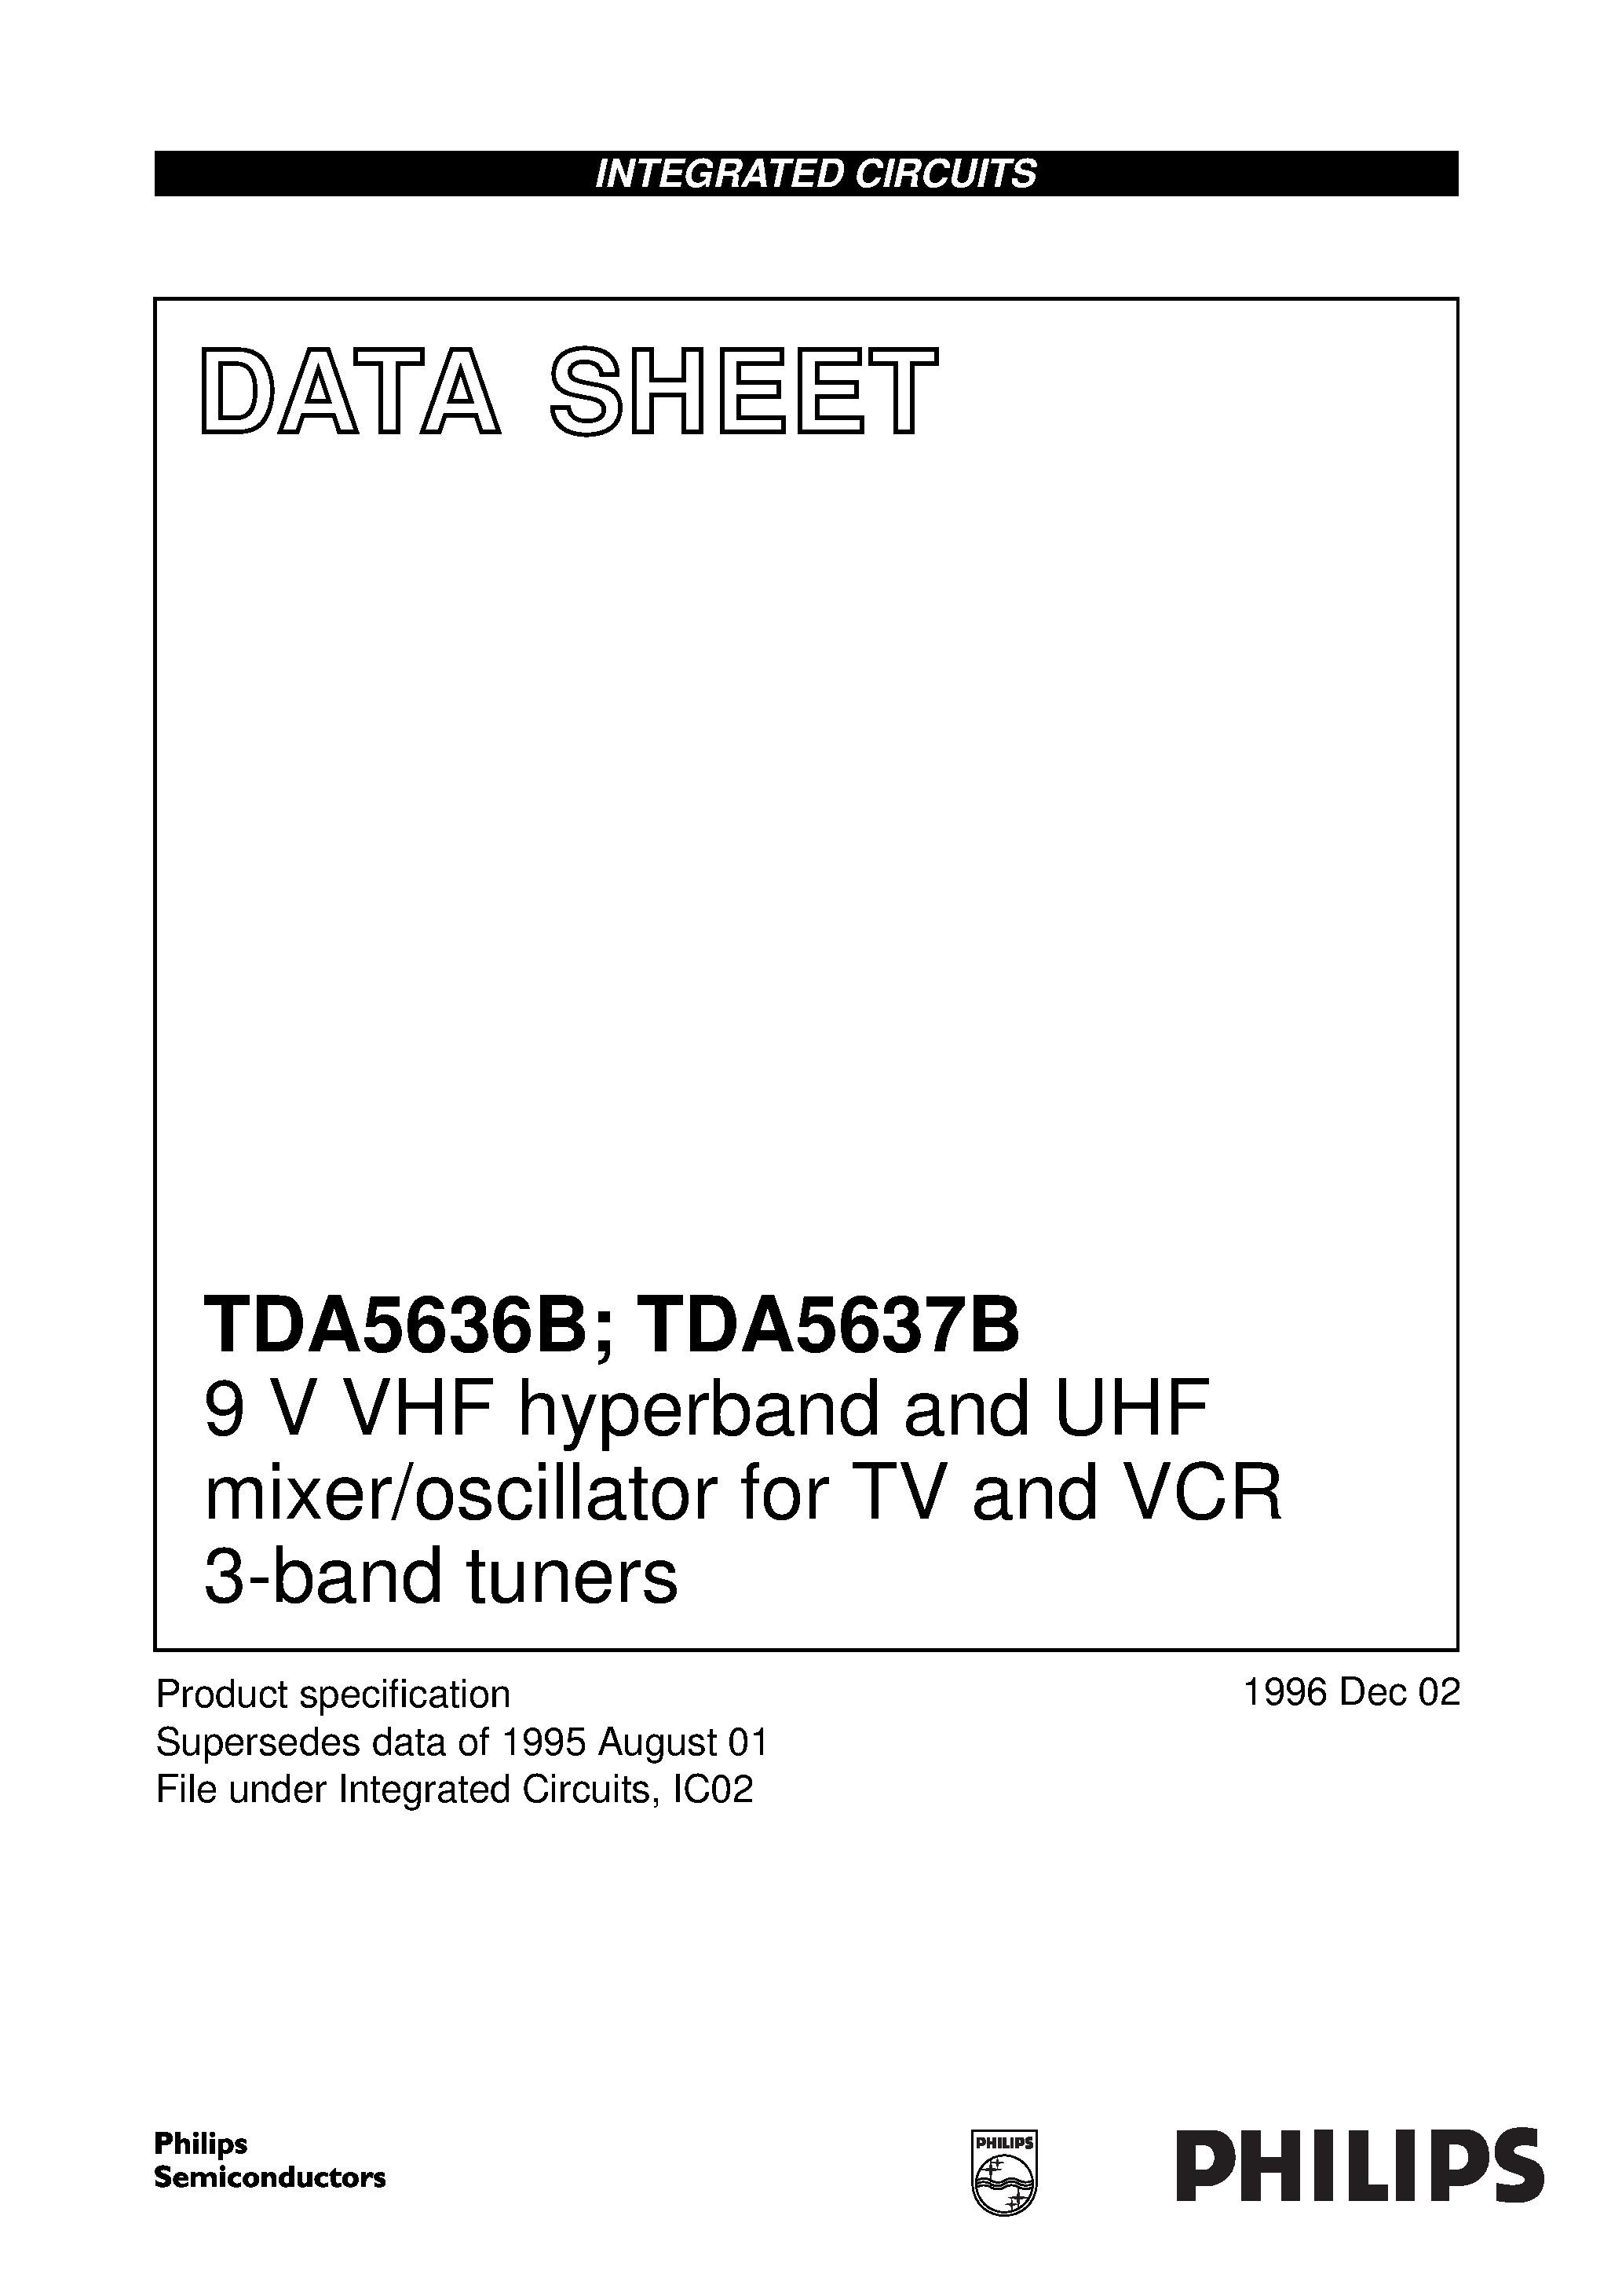 Datasheet TDA5636BT - 9 V VHF hyperband and UHF mixer/oscillator for TV and VCR 3-band tuners page 1